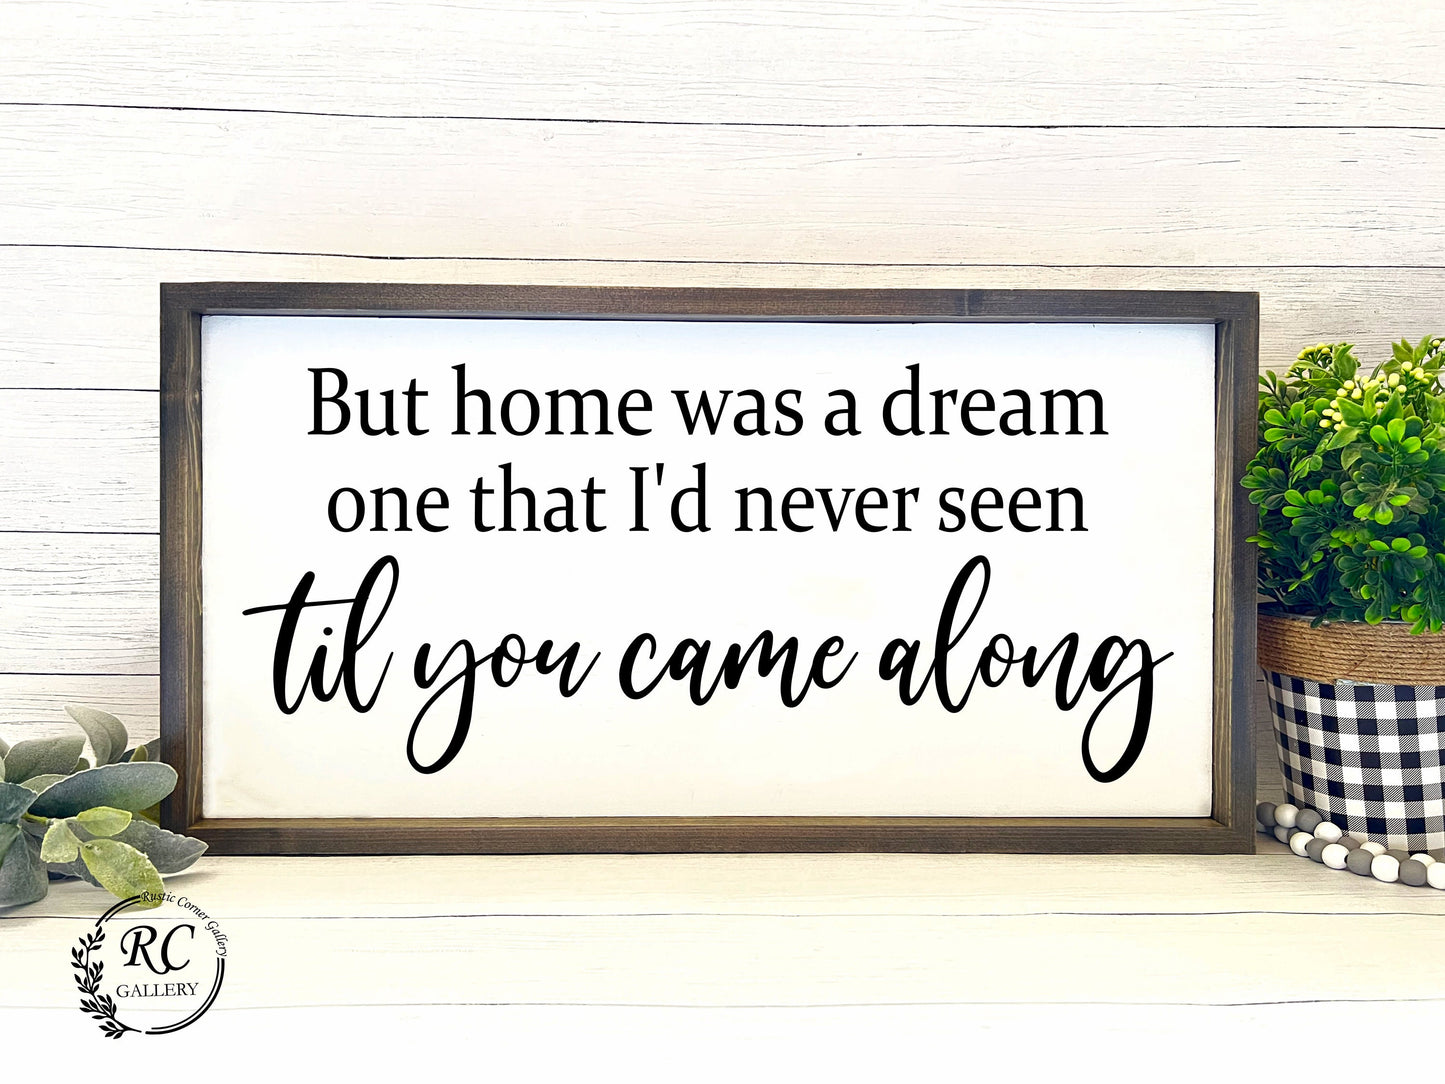 Home was a dream one that I'd never seen til you came along wood sign.